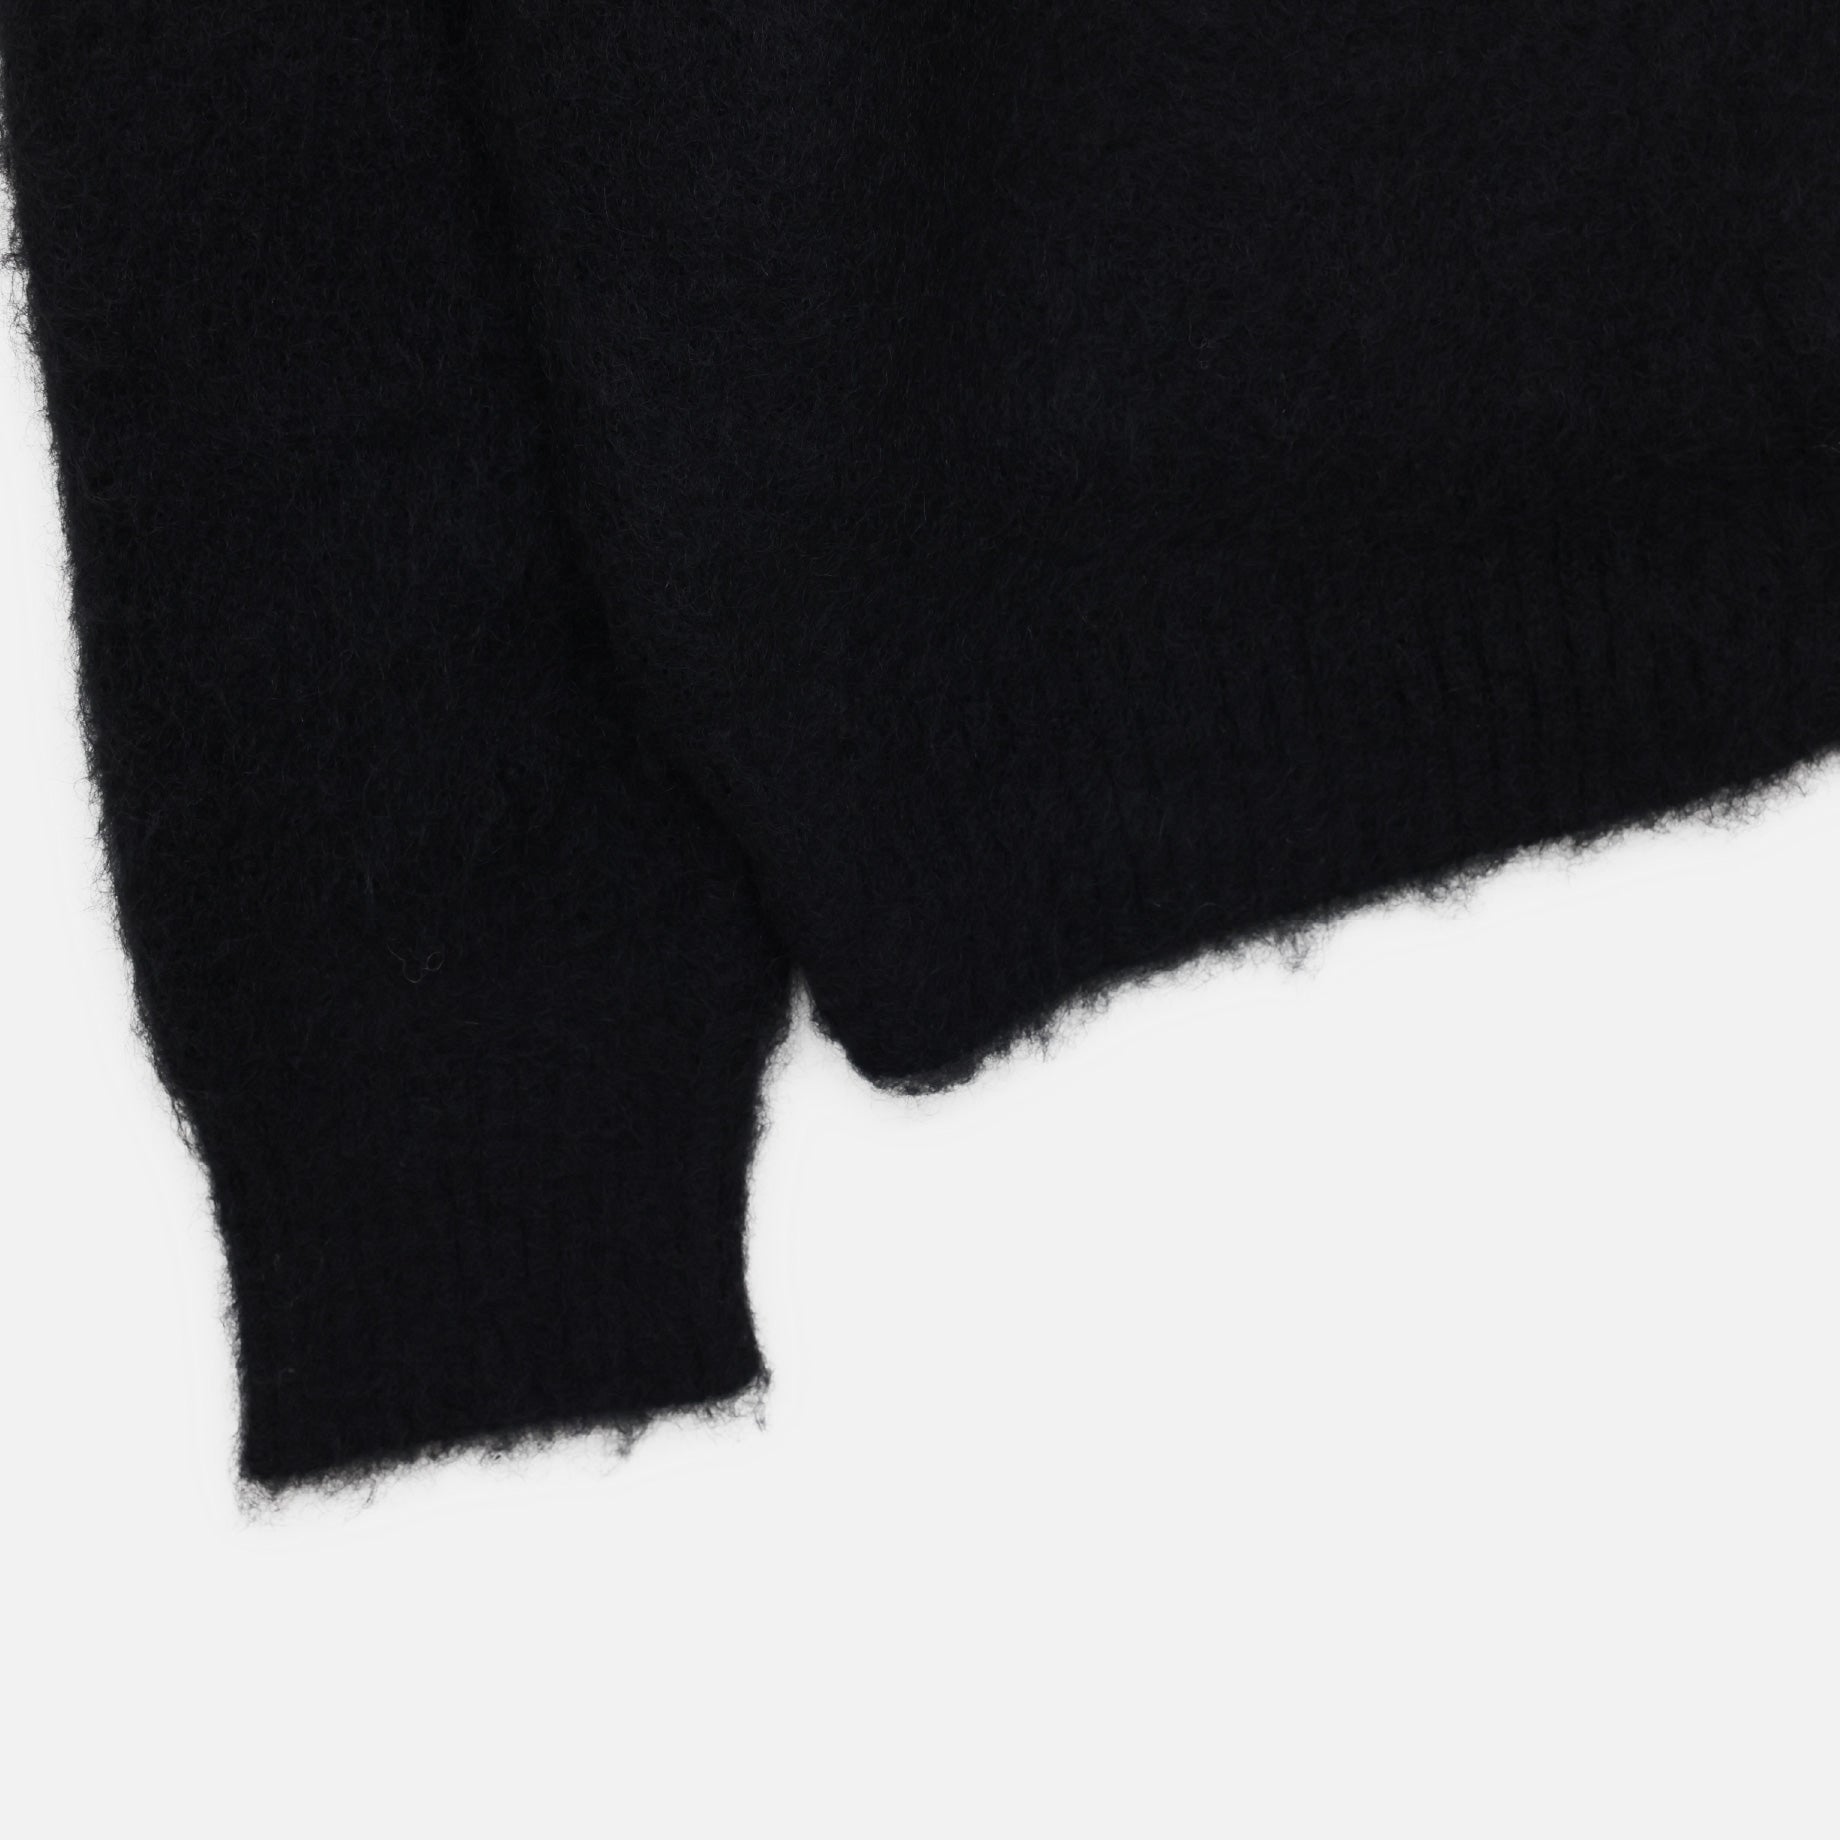 ZIPPED MOHAIR CARDIGAN - SOLID（BLACK）